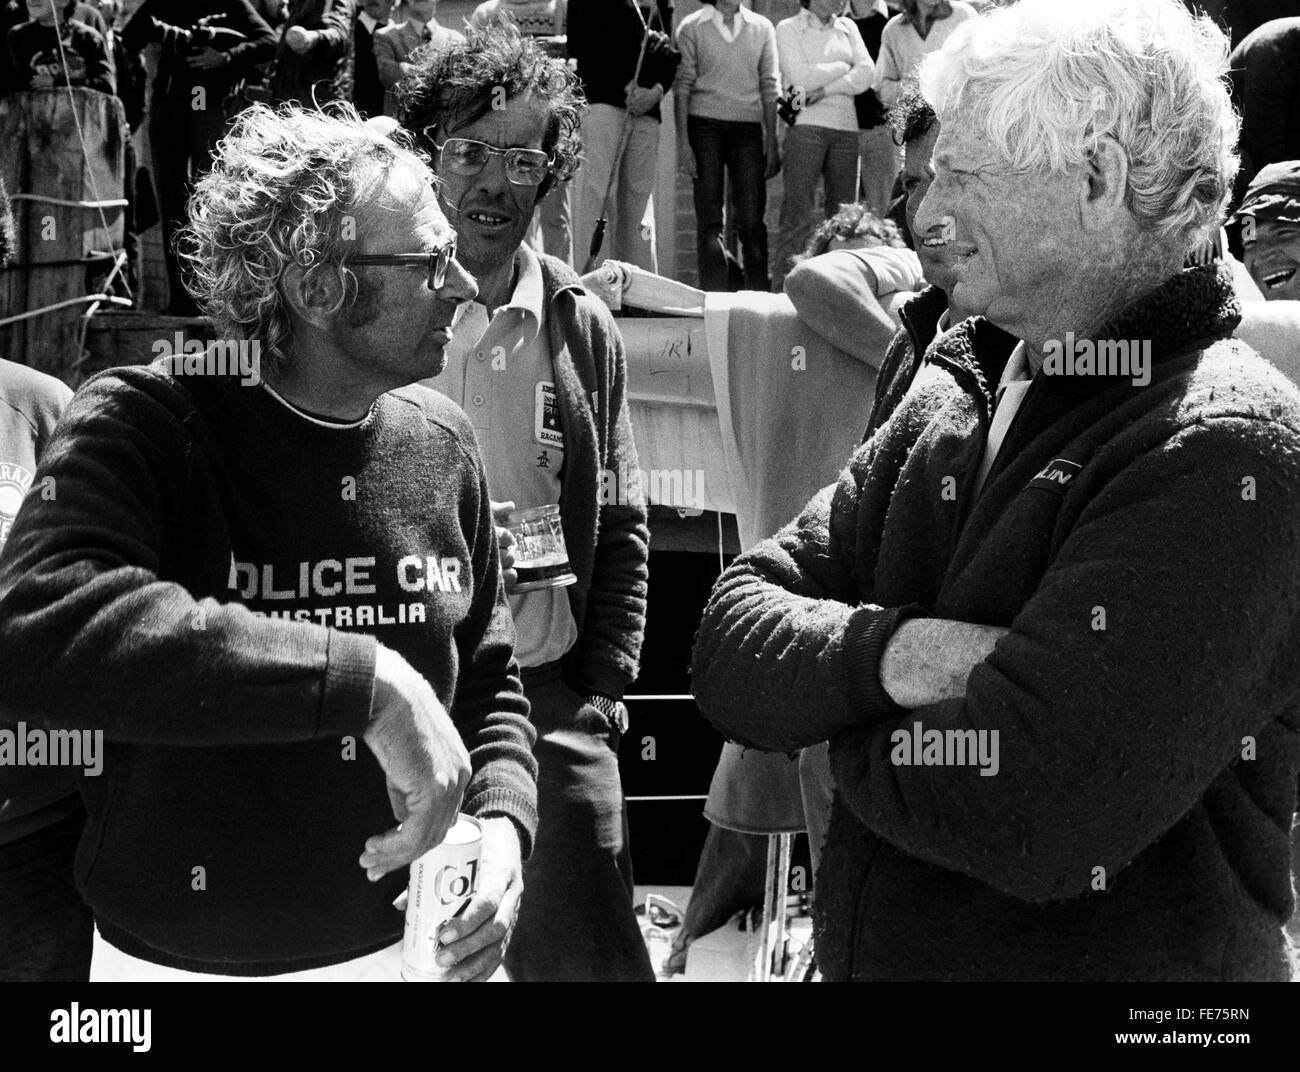 AJAXNETPHOTO - 15th August, 1979. PLYMOUTH, ENGLAND - FASTNET RACE - (r-l) SYD FISCHER (AUS) SKIPPER OF THE YACHT RAGAMUFFIN AND PETER CANTWELL (AUS), SKIPPER OF POLICE CAR DISCUSS THEIR EXPERIENCES IN THE STORMY RACE. PHOTO:JONATHAN EASTLAND/AJAX REF: 79108 1 Stock Photo